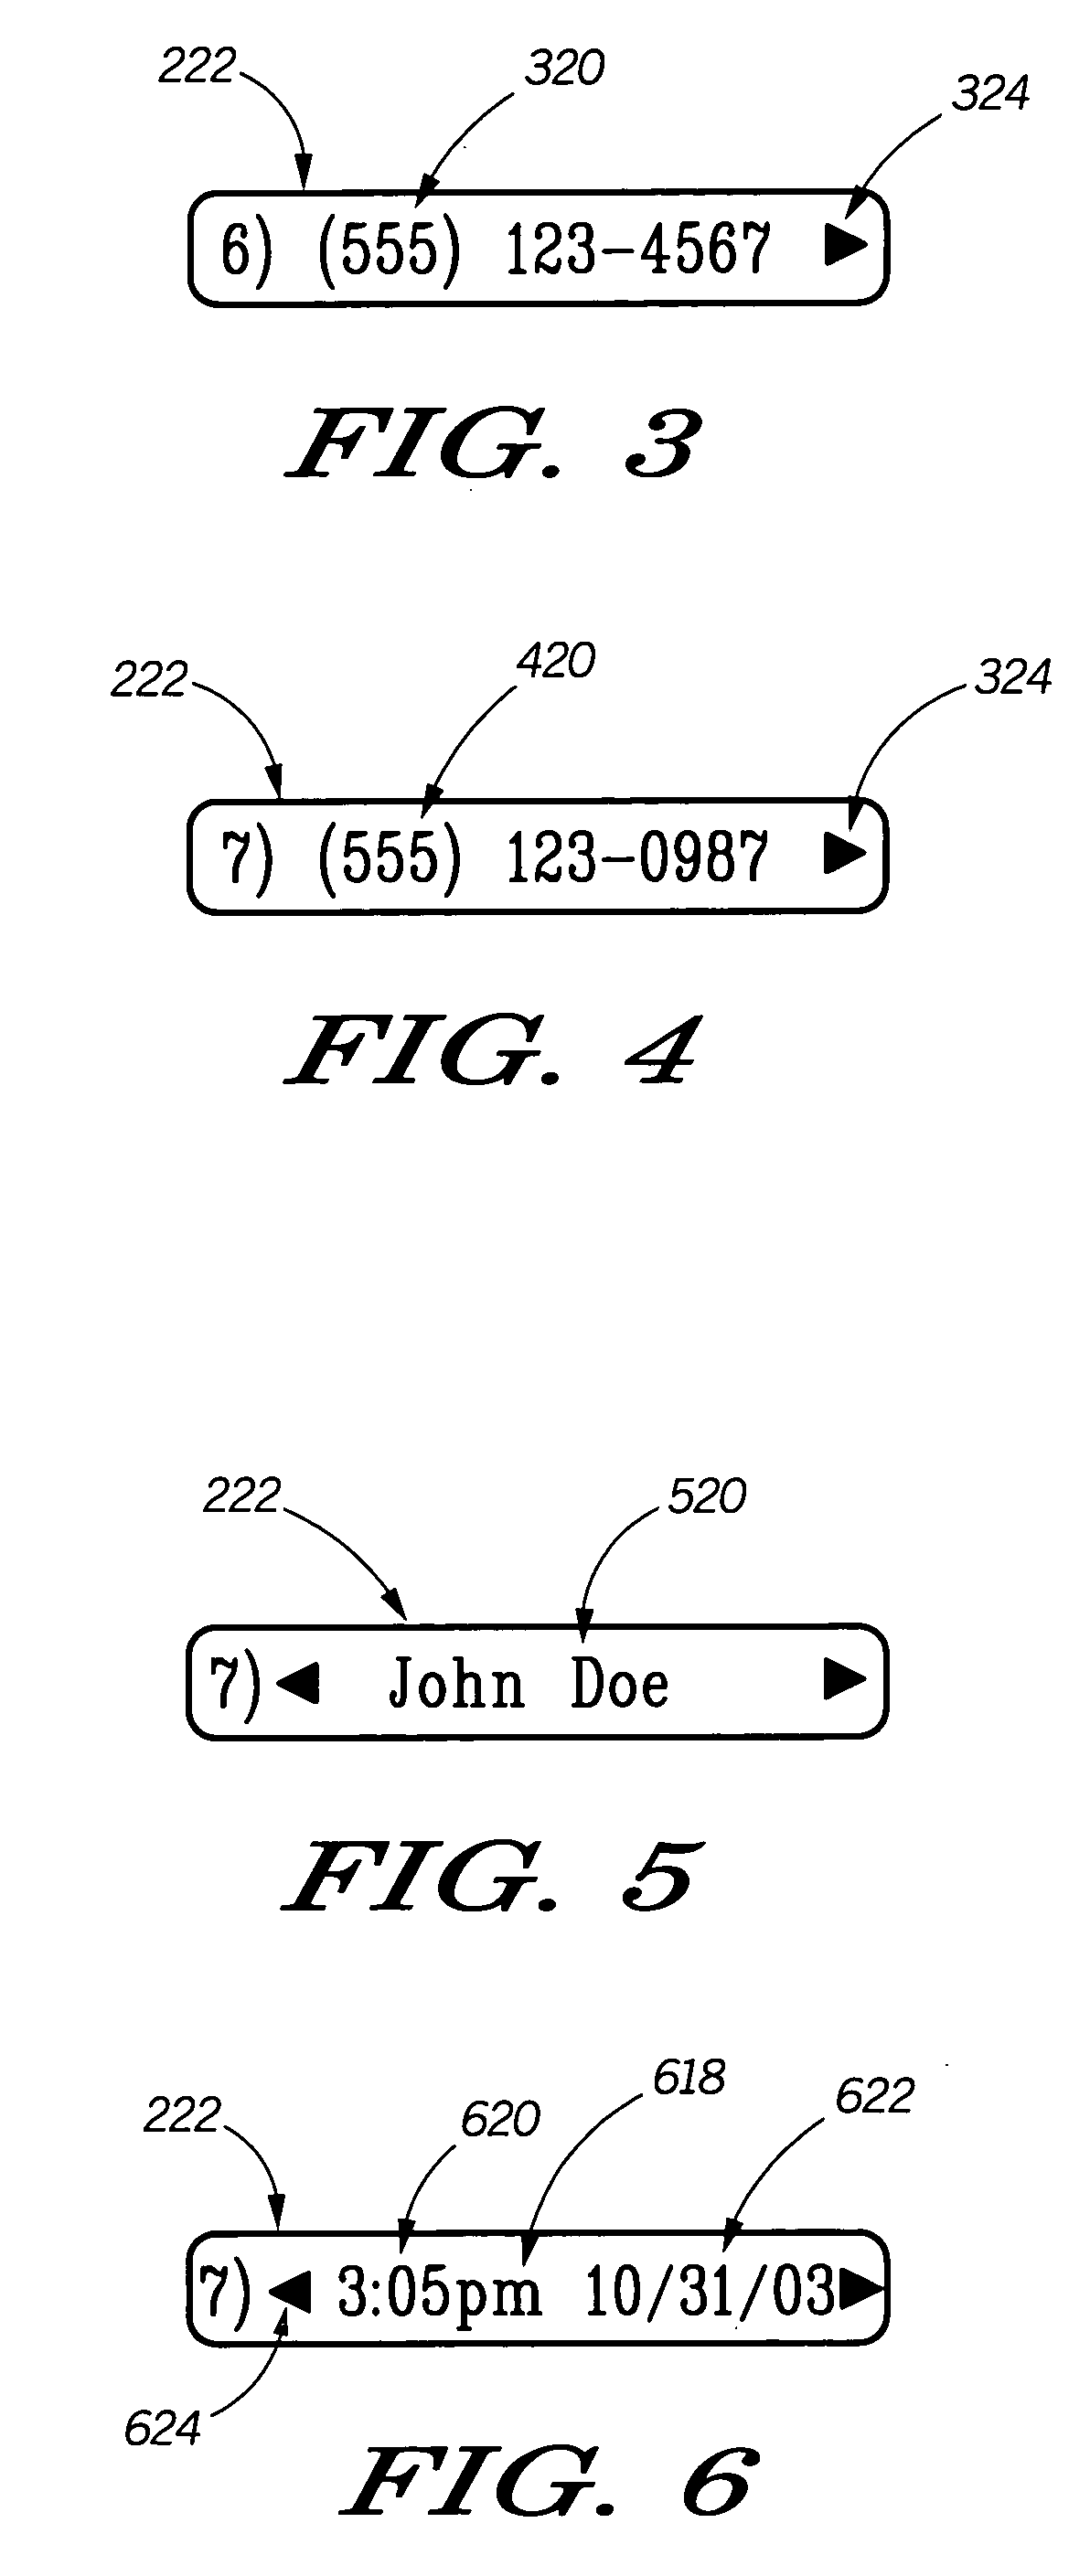 Method and apparatus for use in accessing and displaying data on a limited display